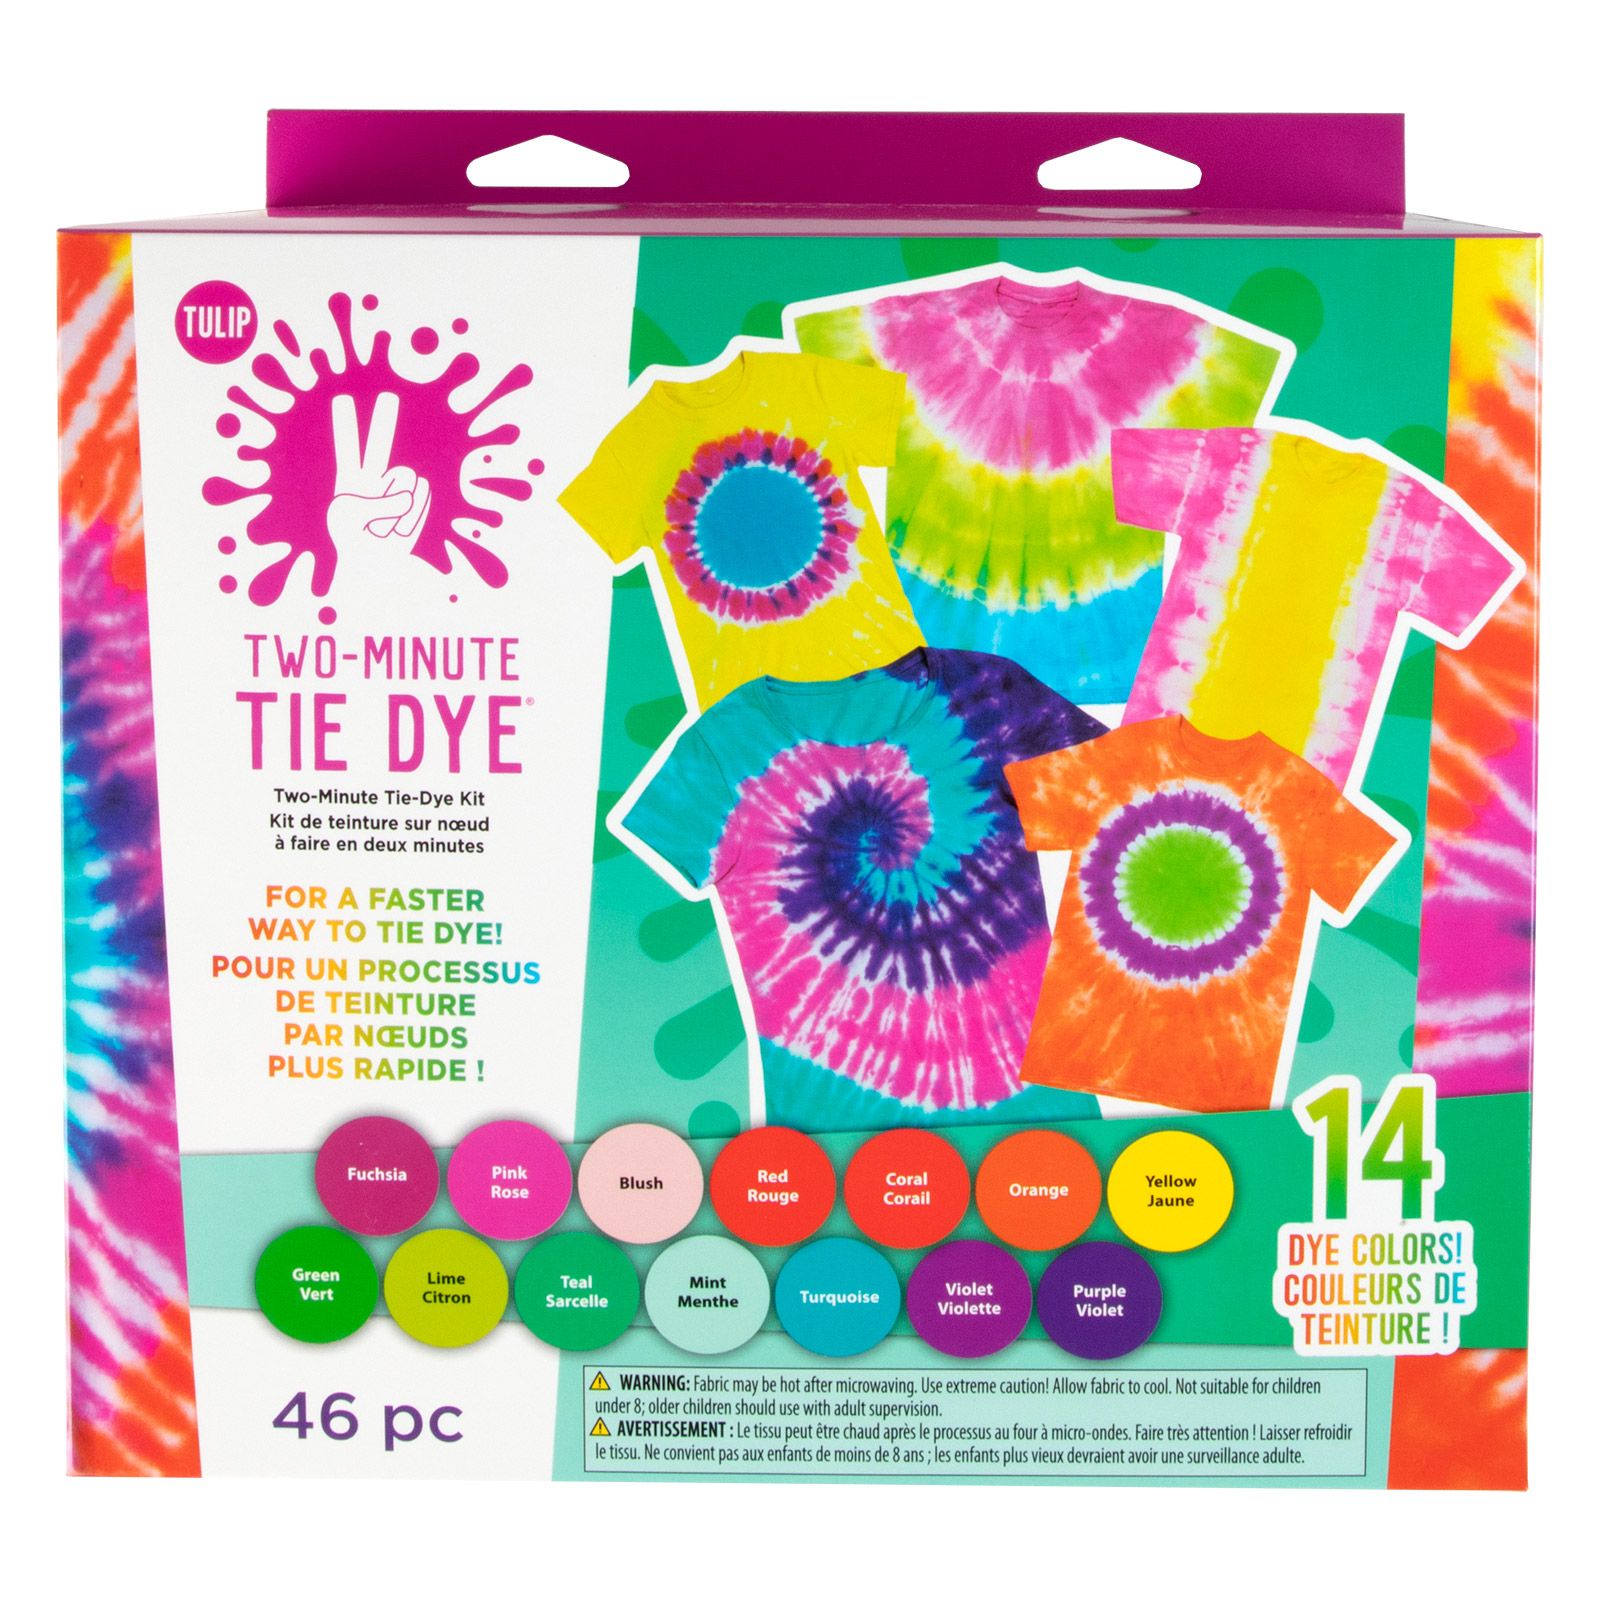 Tulip one-step tie dye • Two-minute tie dye extra large kit 46pcs